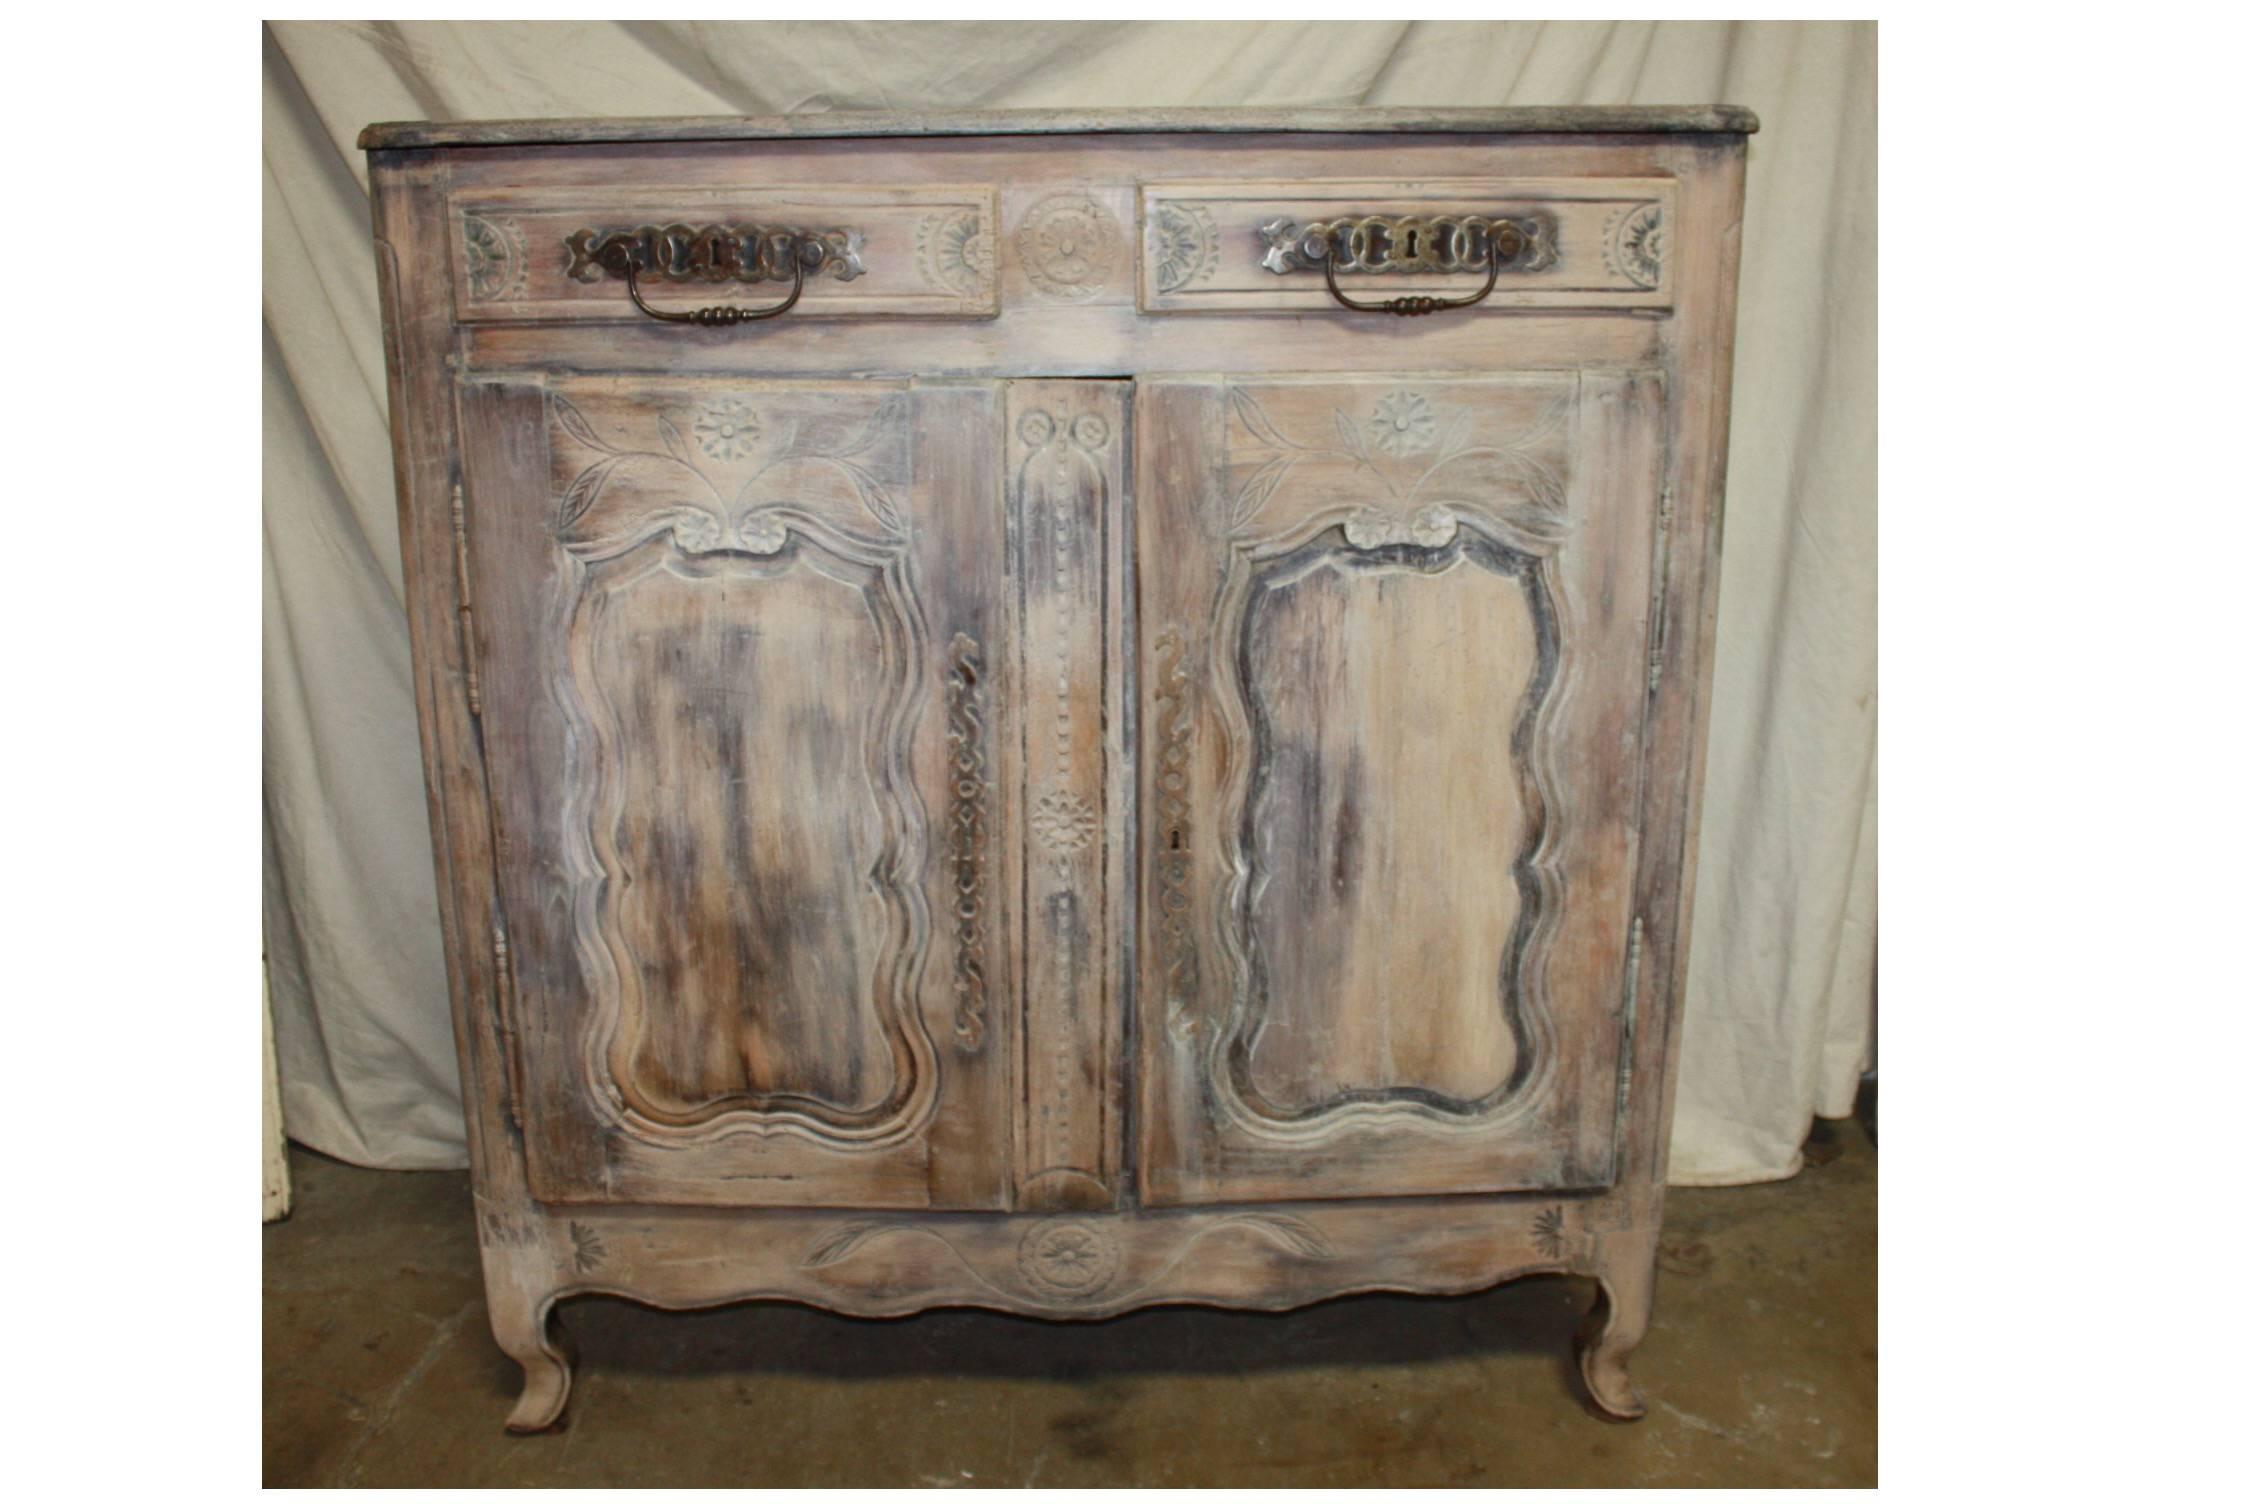 Superb 18th century French buffet, the wood is covered with white wax.